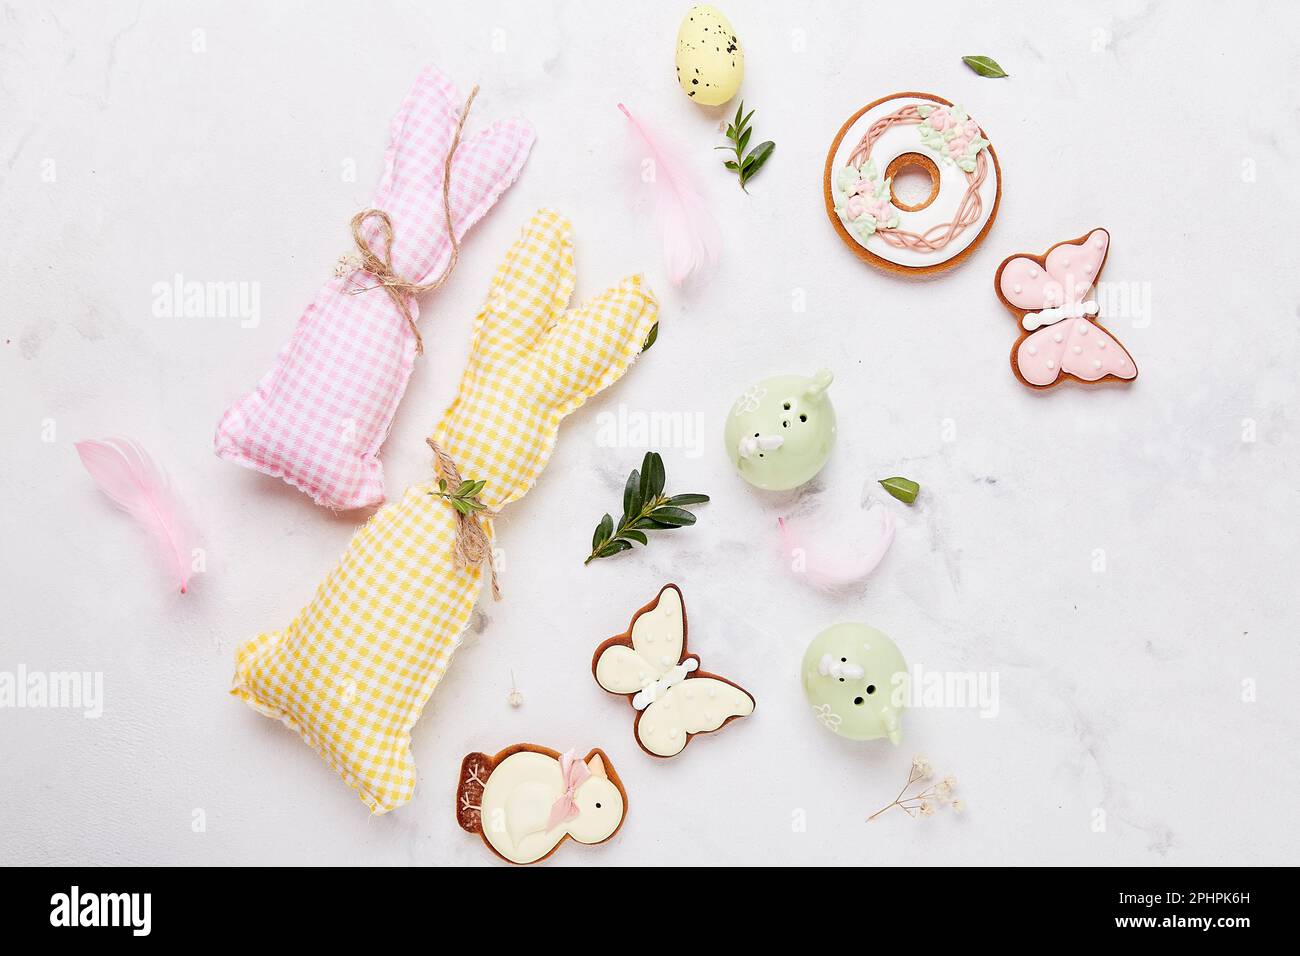 Easter traditional colorful cookies with handmade crafting bunny toys. Happy Easter background. Stock Photo